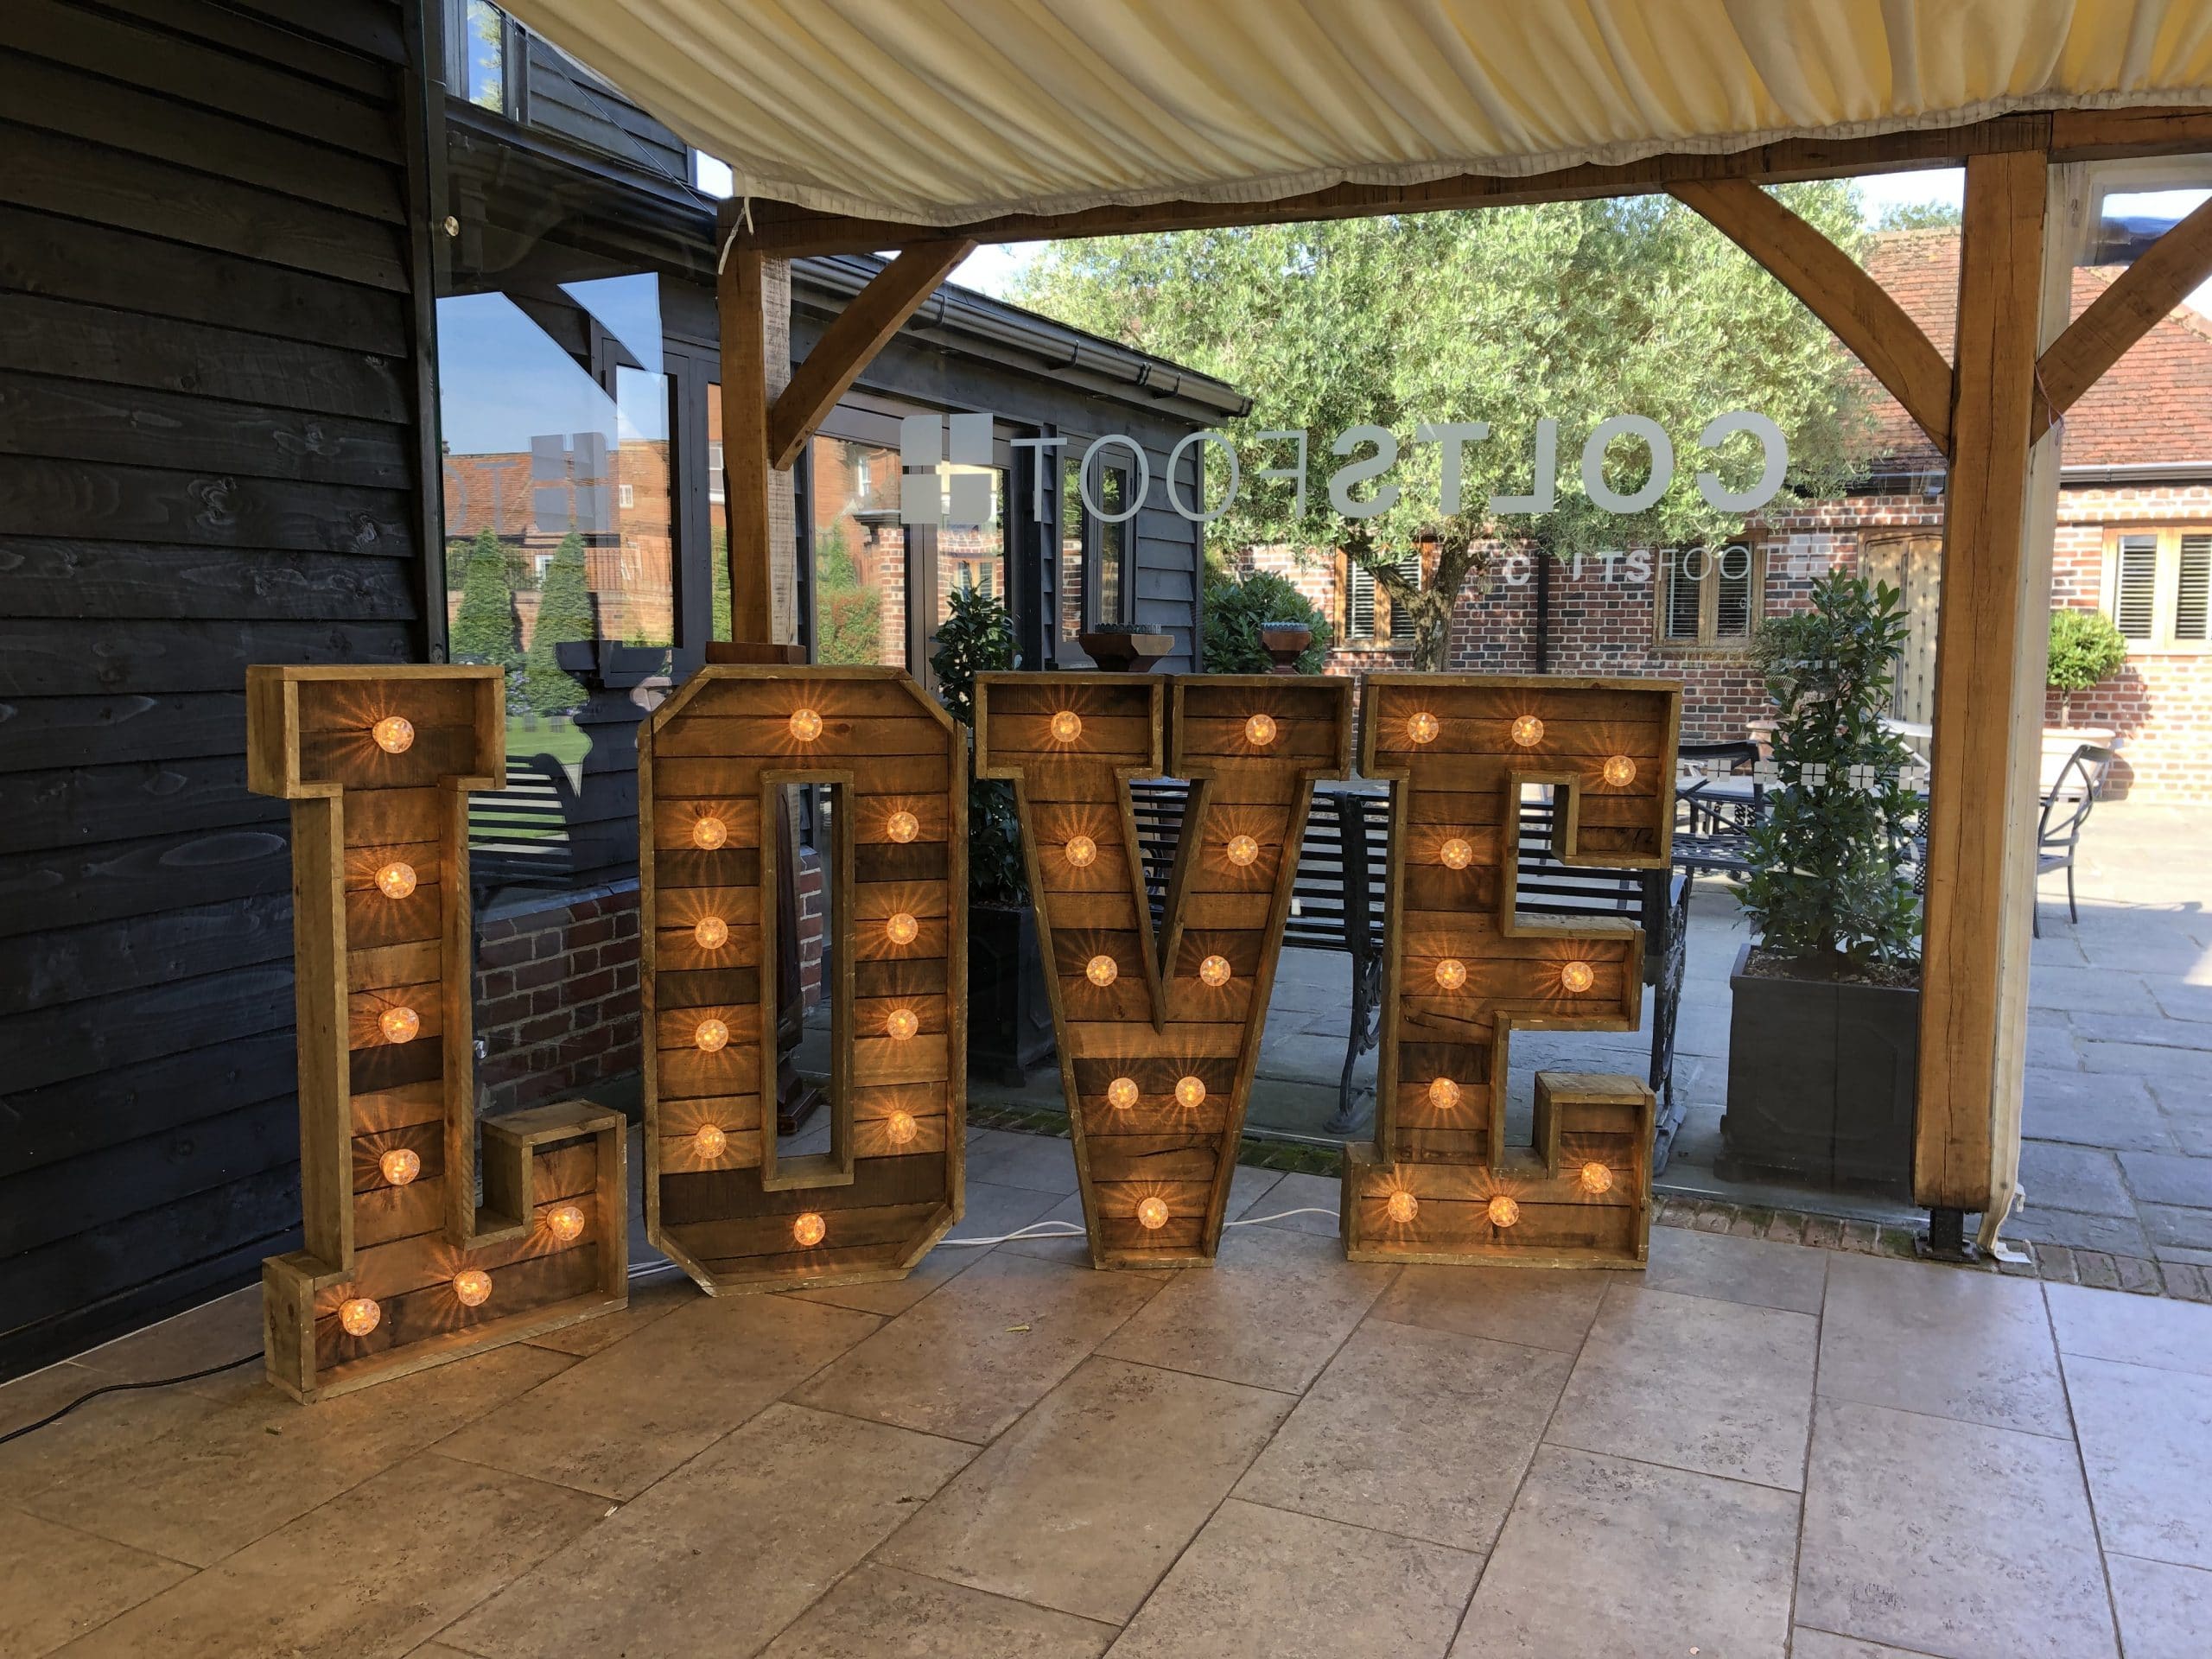 Rustic Love Letters at Coltsfoot